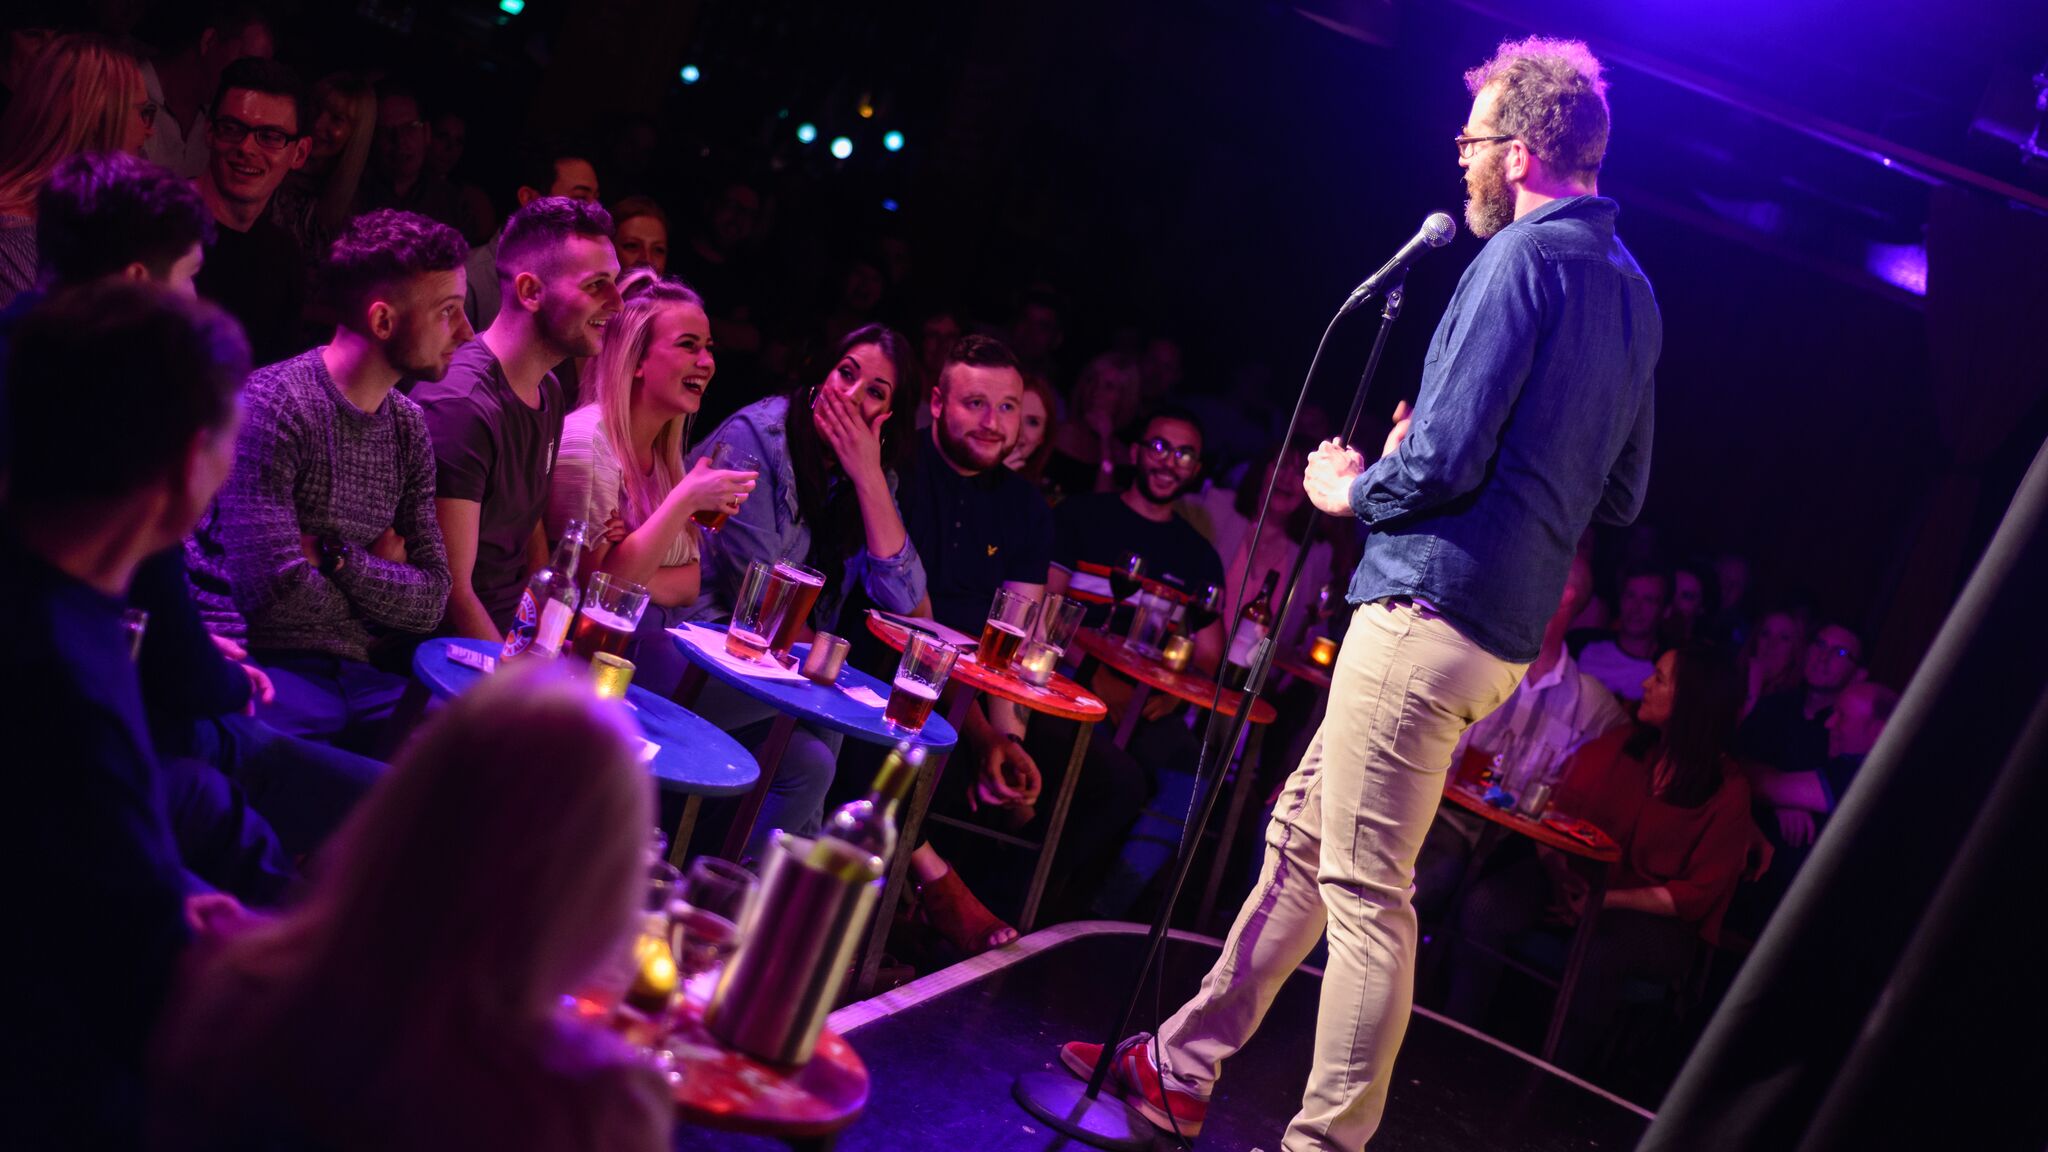 Stand up comedy at a comedy club - one of the best things to do in Edinburgh